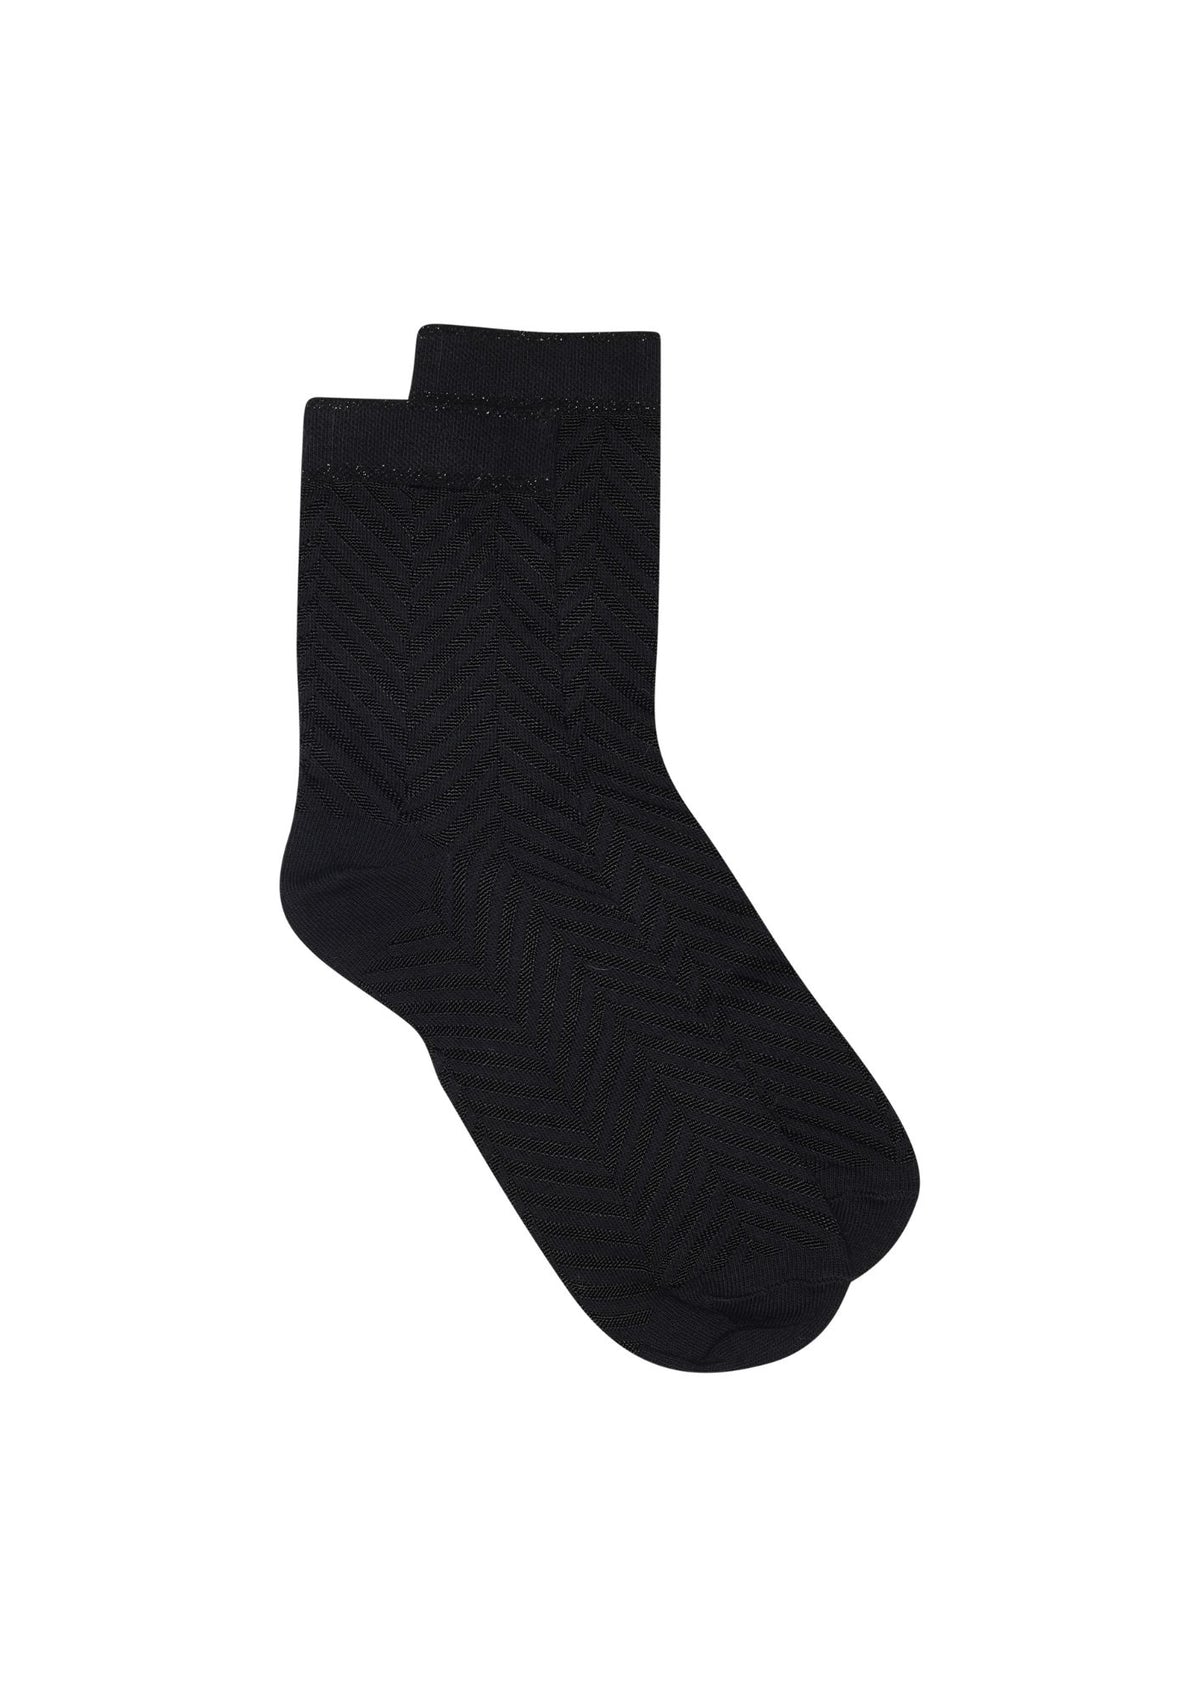 Kaila Short Sock Black with pattern design and sparkle trim